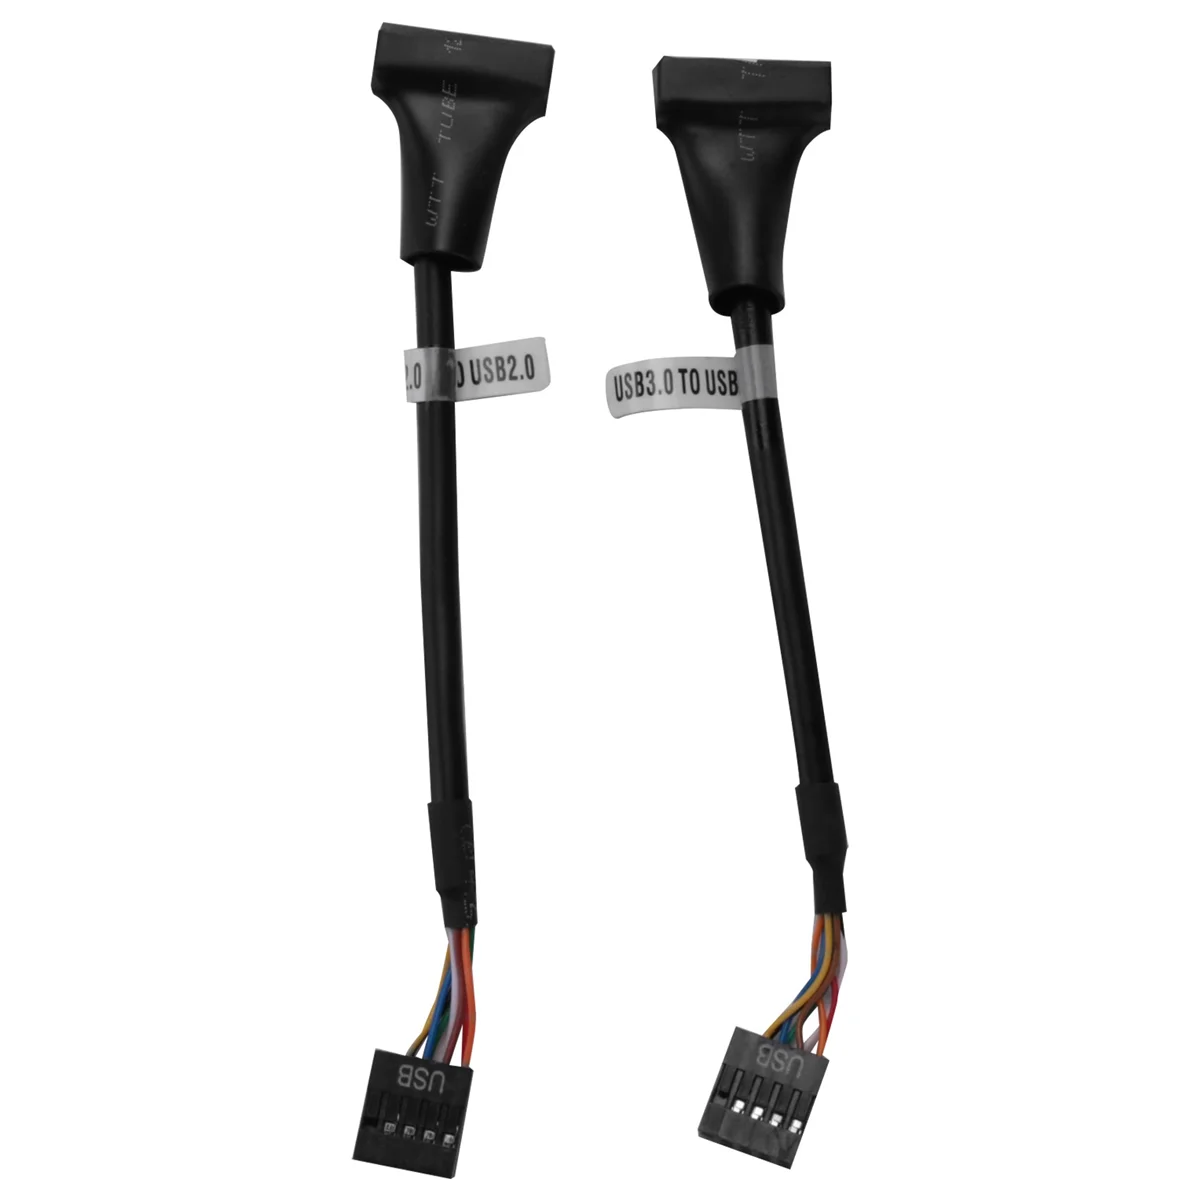 

2 Pcs USB 3.0 Header To USB 2.0,USB 3.0 To USB 2.0 Motherboard Adapter Cable,19 Pin USB3.0 Male To 9 Pin USB2.0 Female